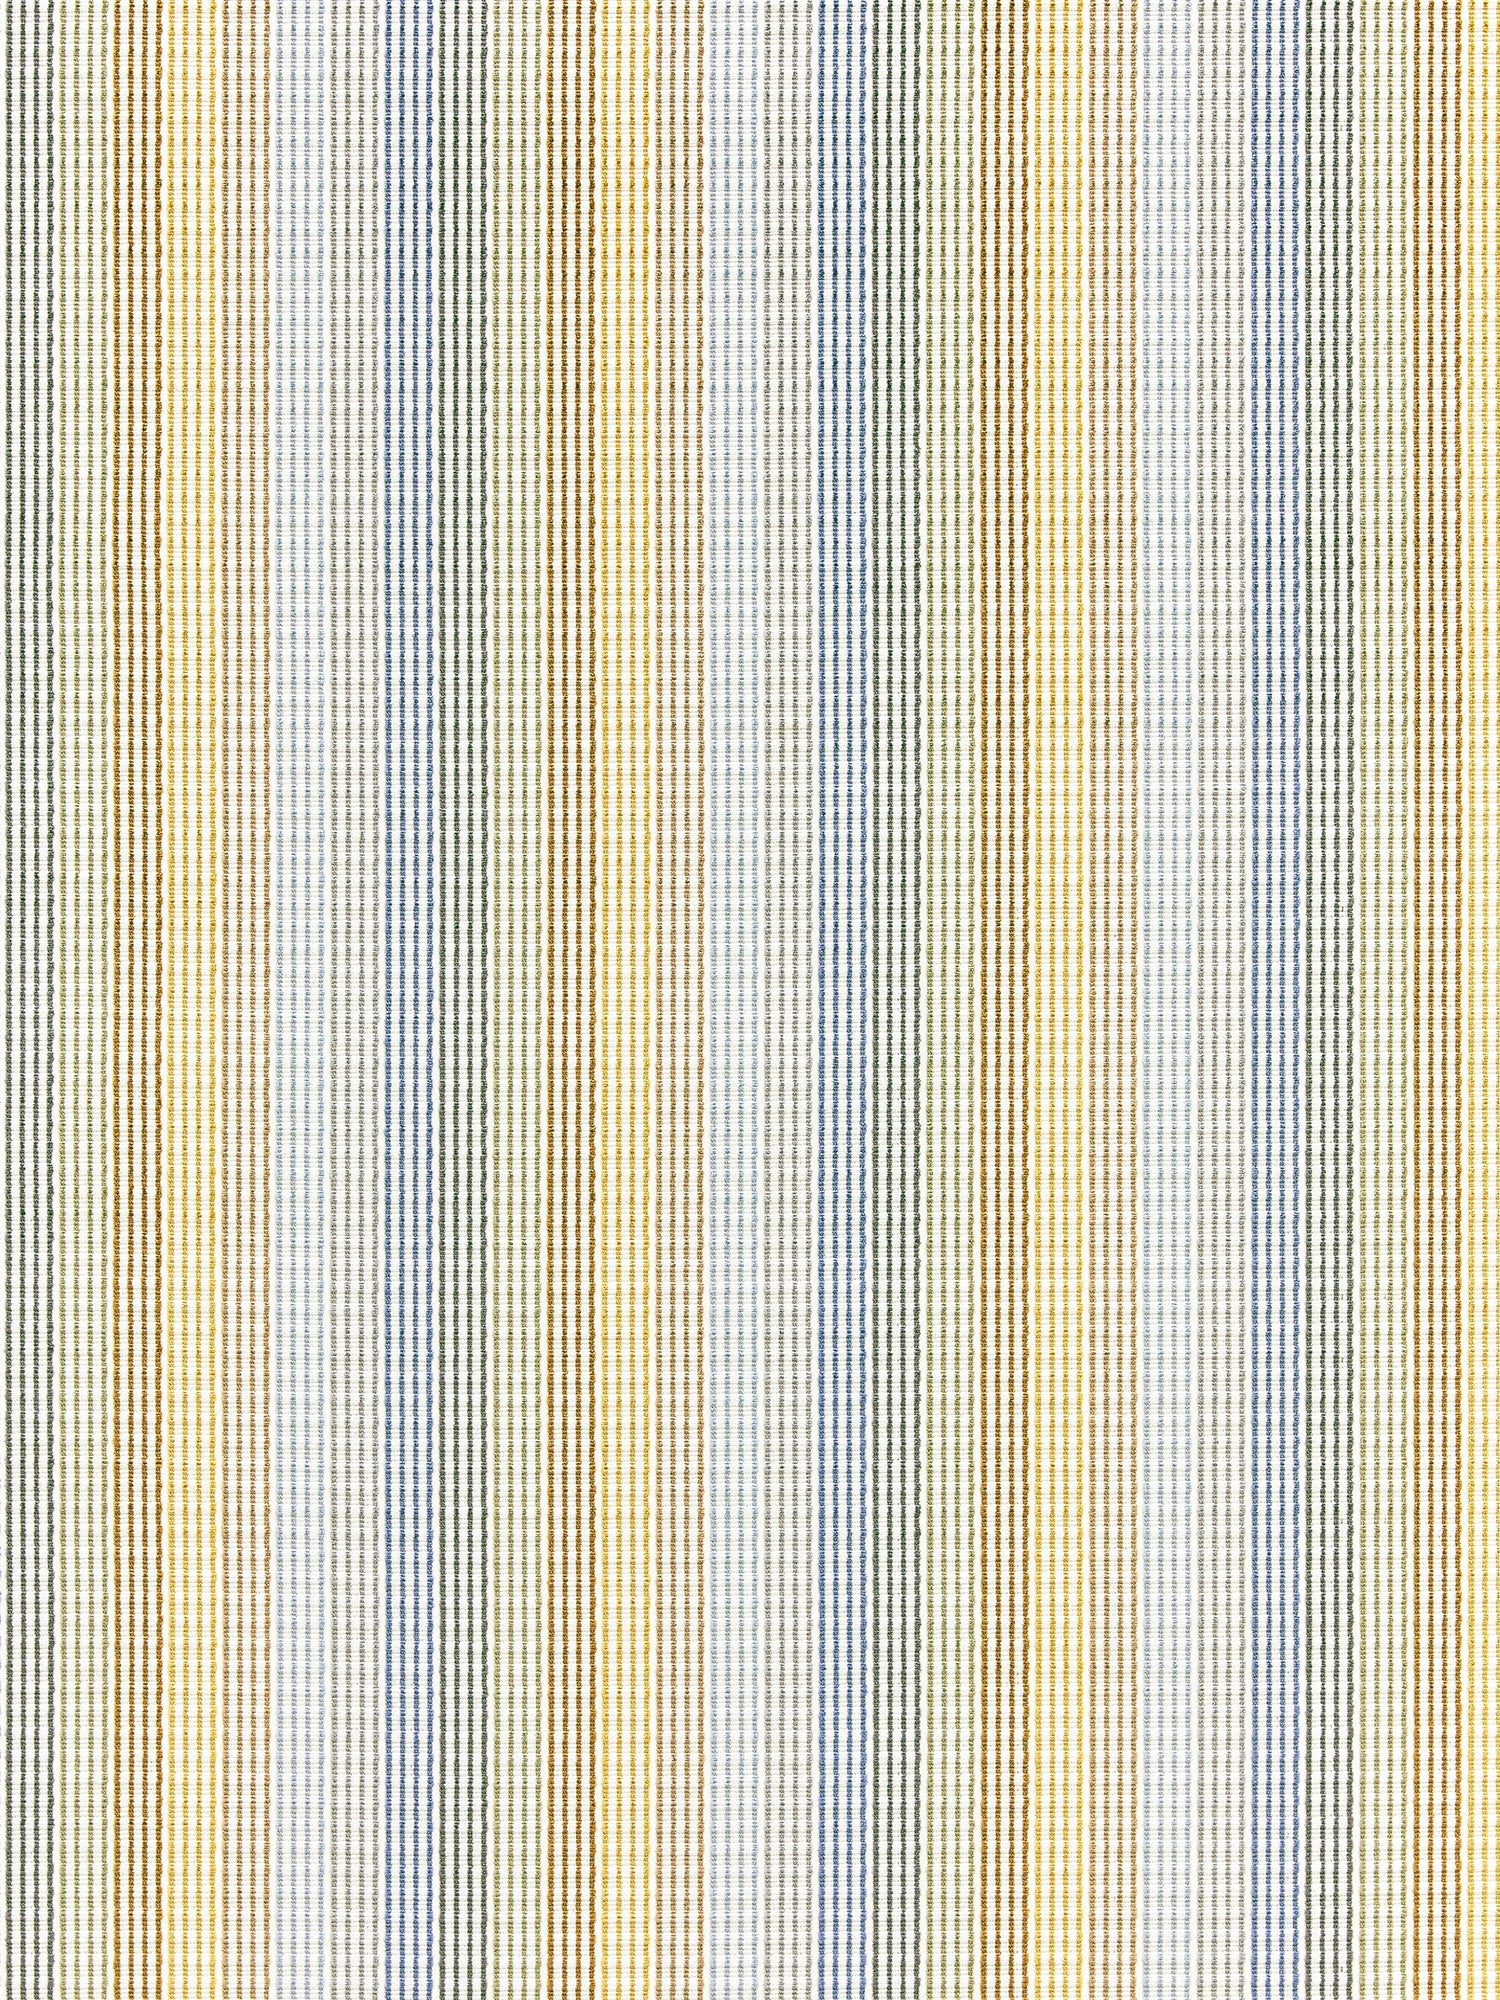 Anderson Velvet Stripe fabric in coastline color - pattern number GW 000127244 - by Scalamandre in the Grey Watkins collection